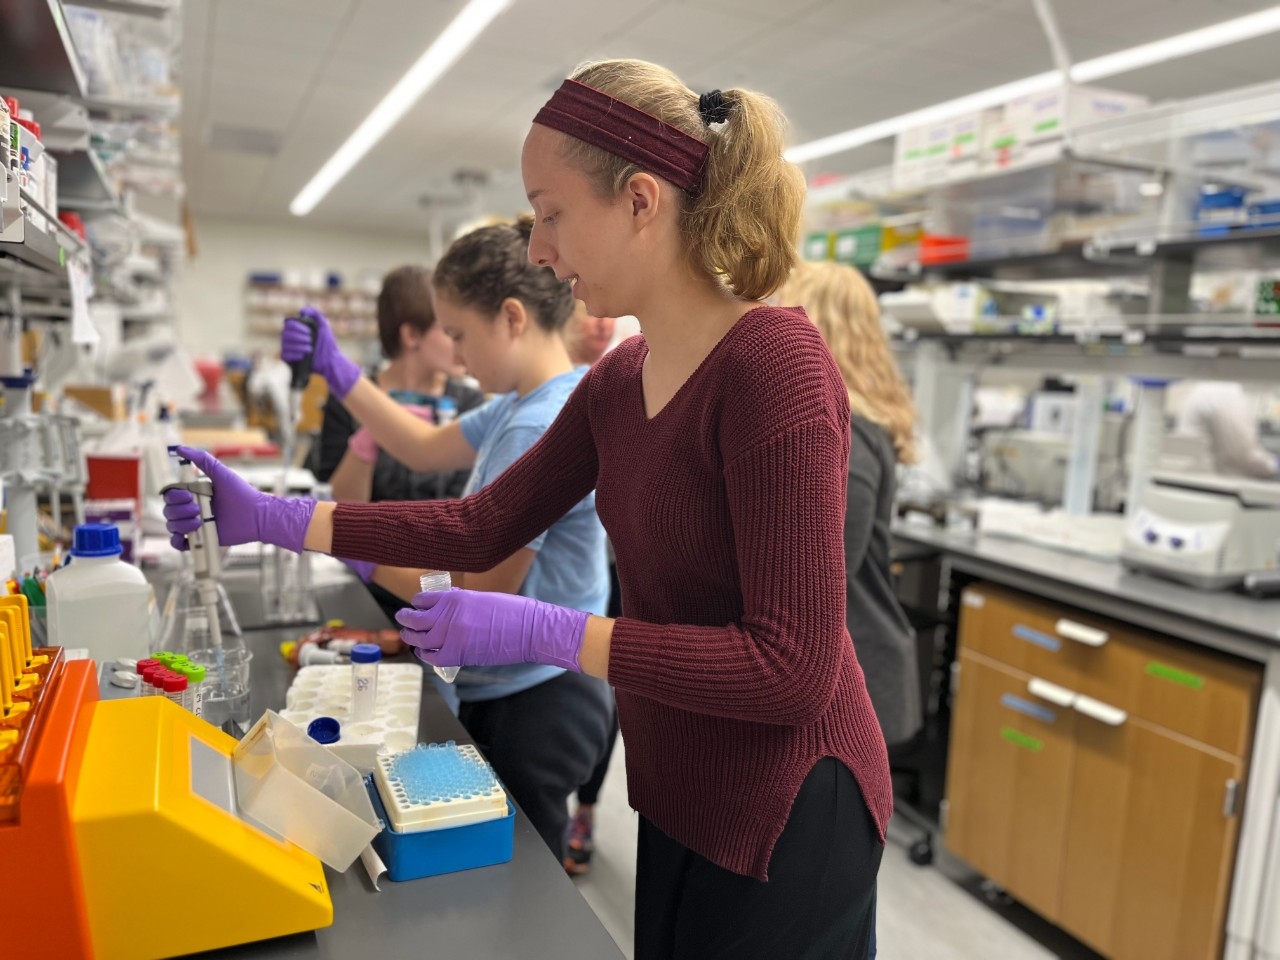 NKU Biological Sciences students doing summer research in the lab.